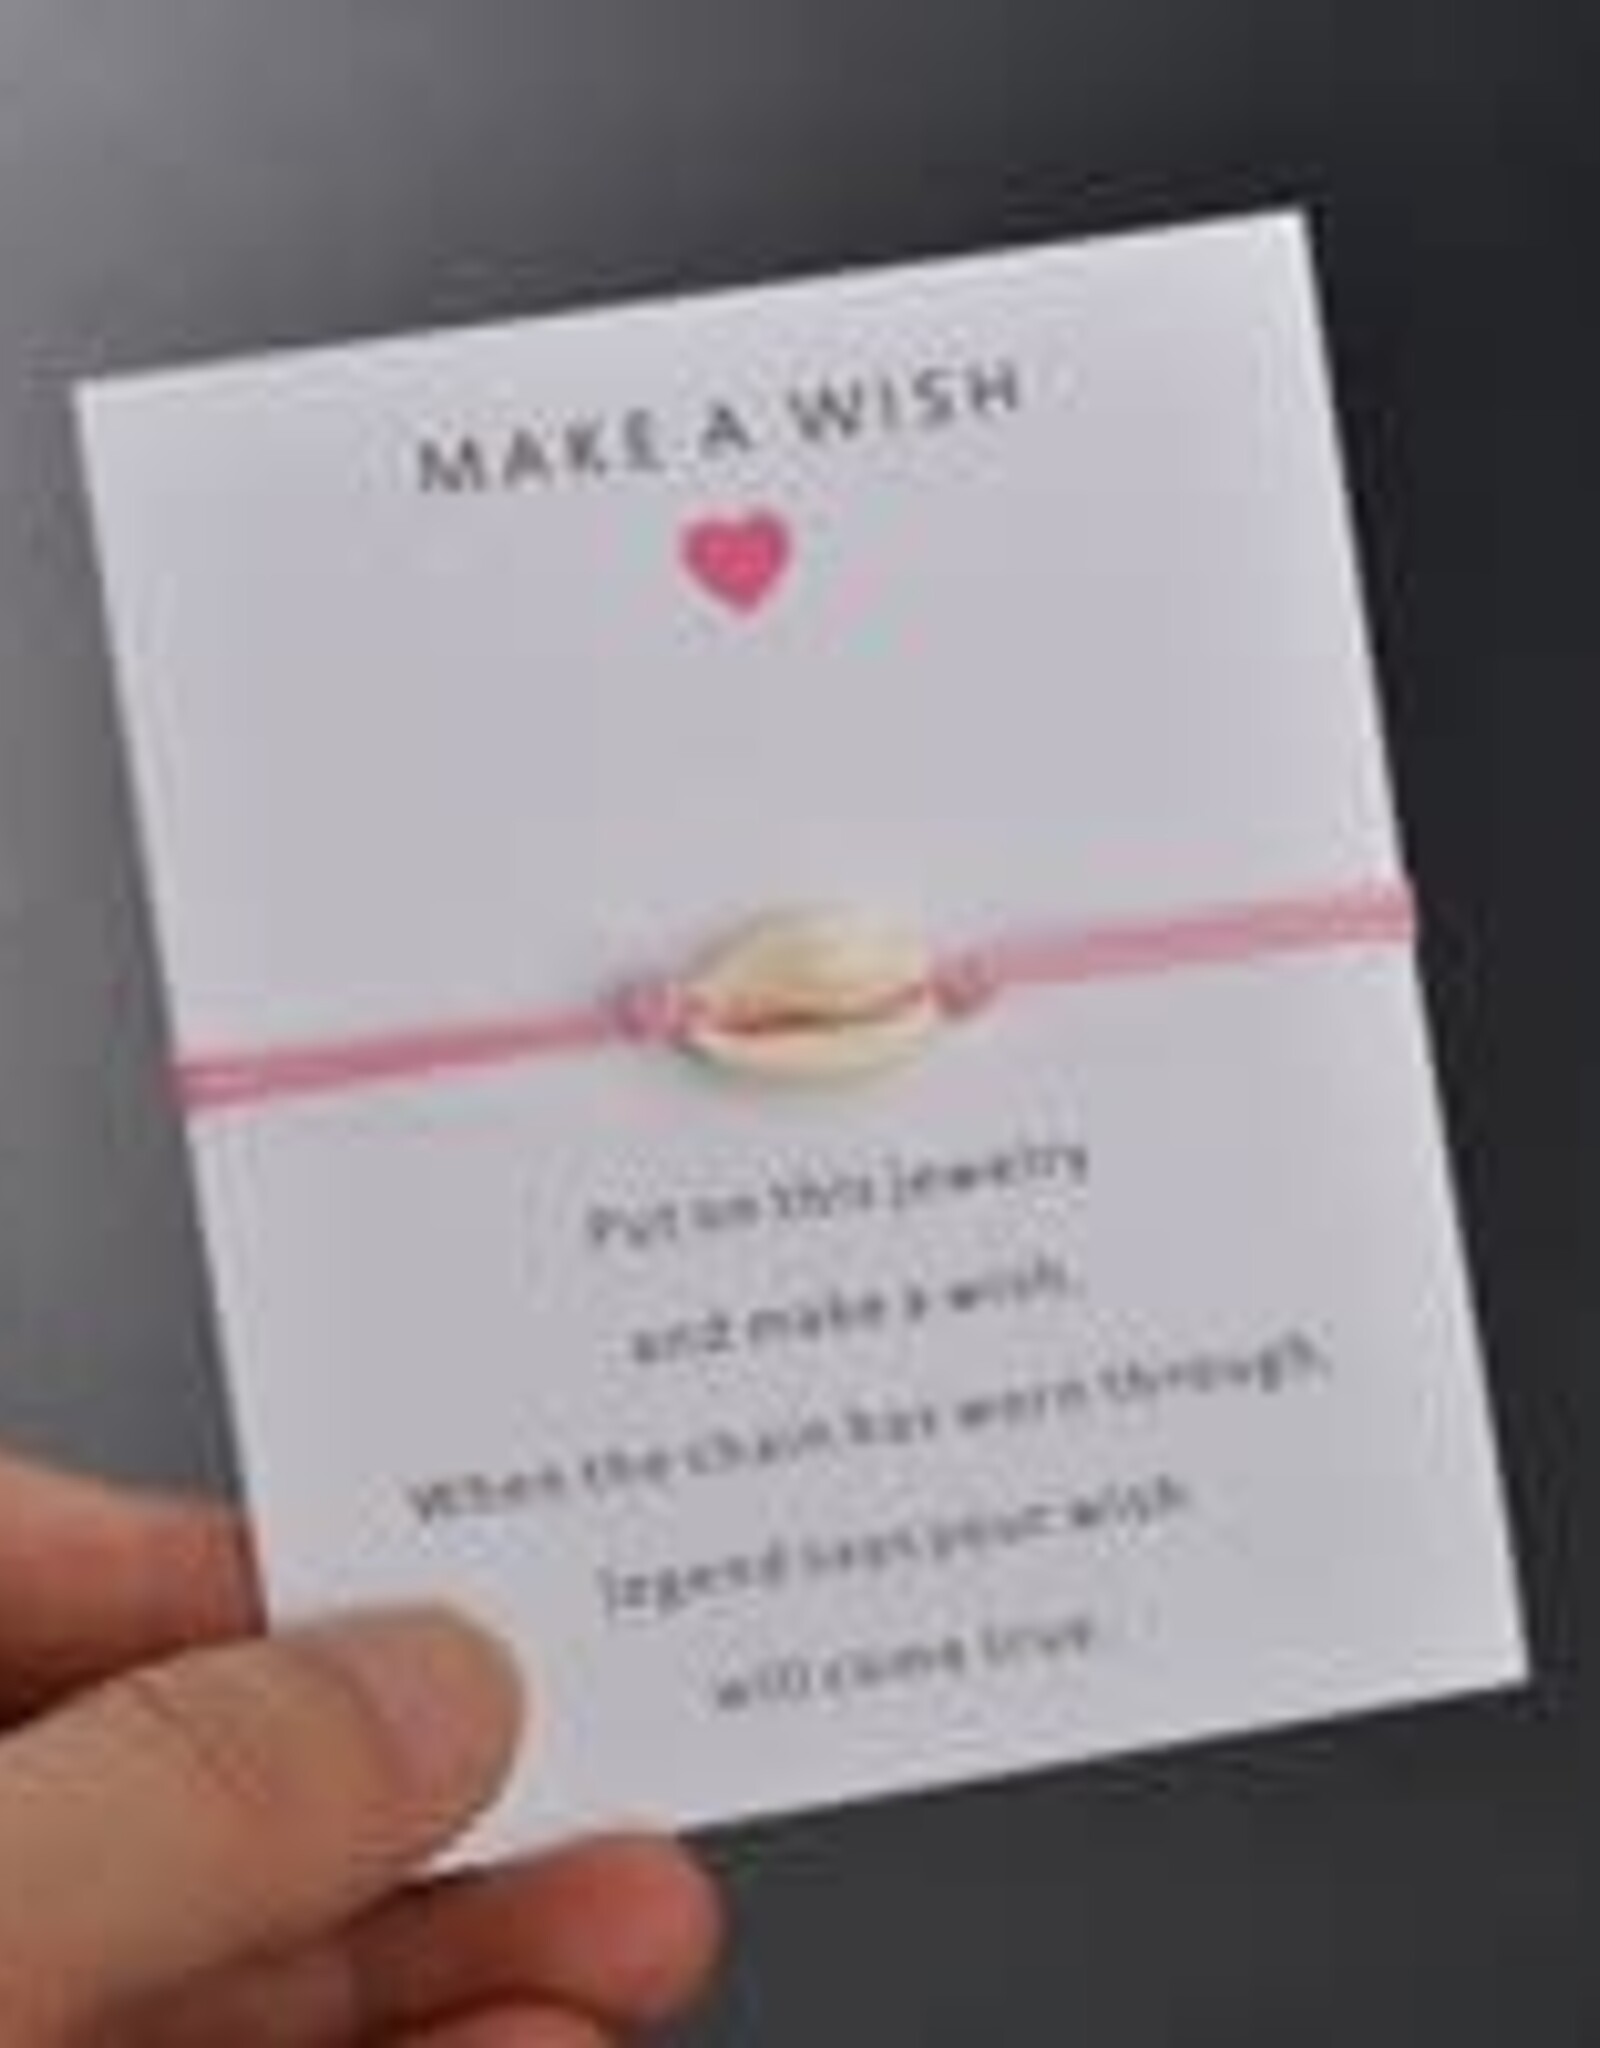 Cowrie Shell Make a Wish Bracelet - Pink - on Card